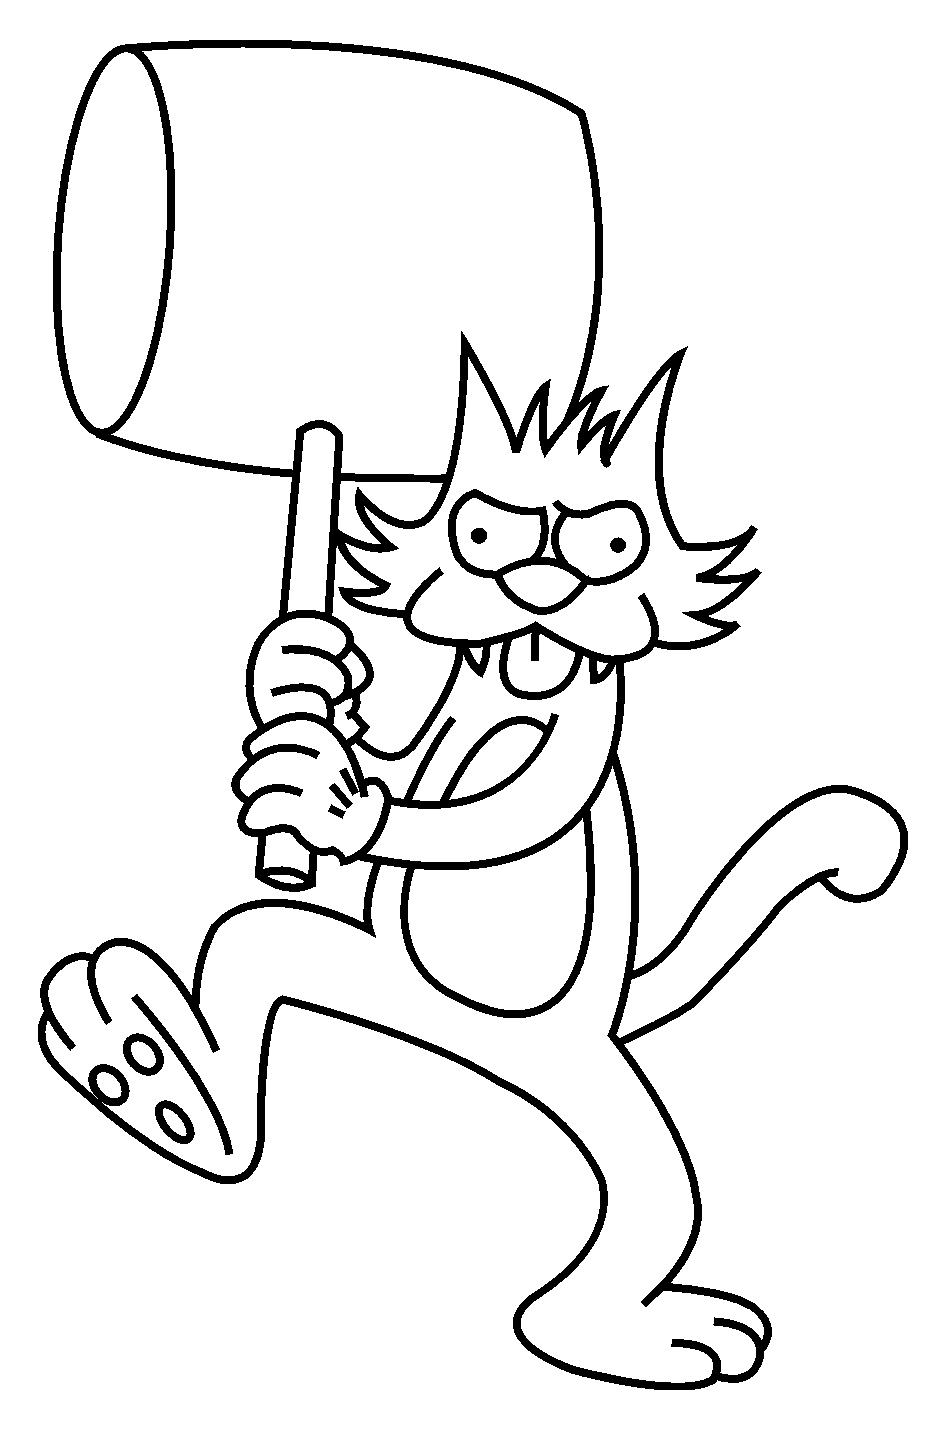 The Simpsons coloring pages to print